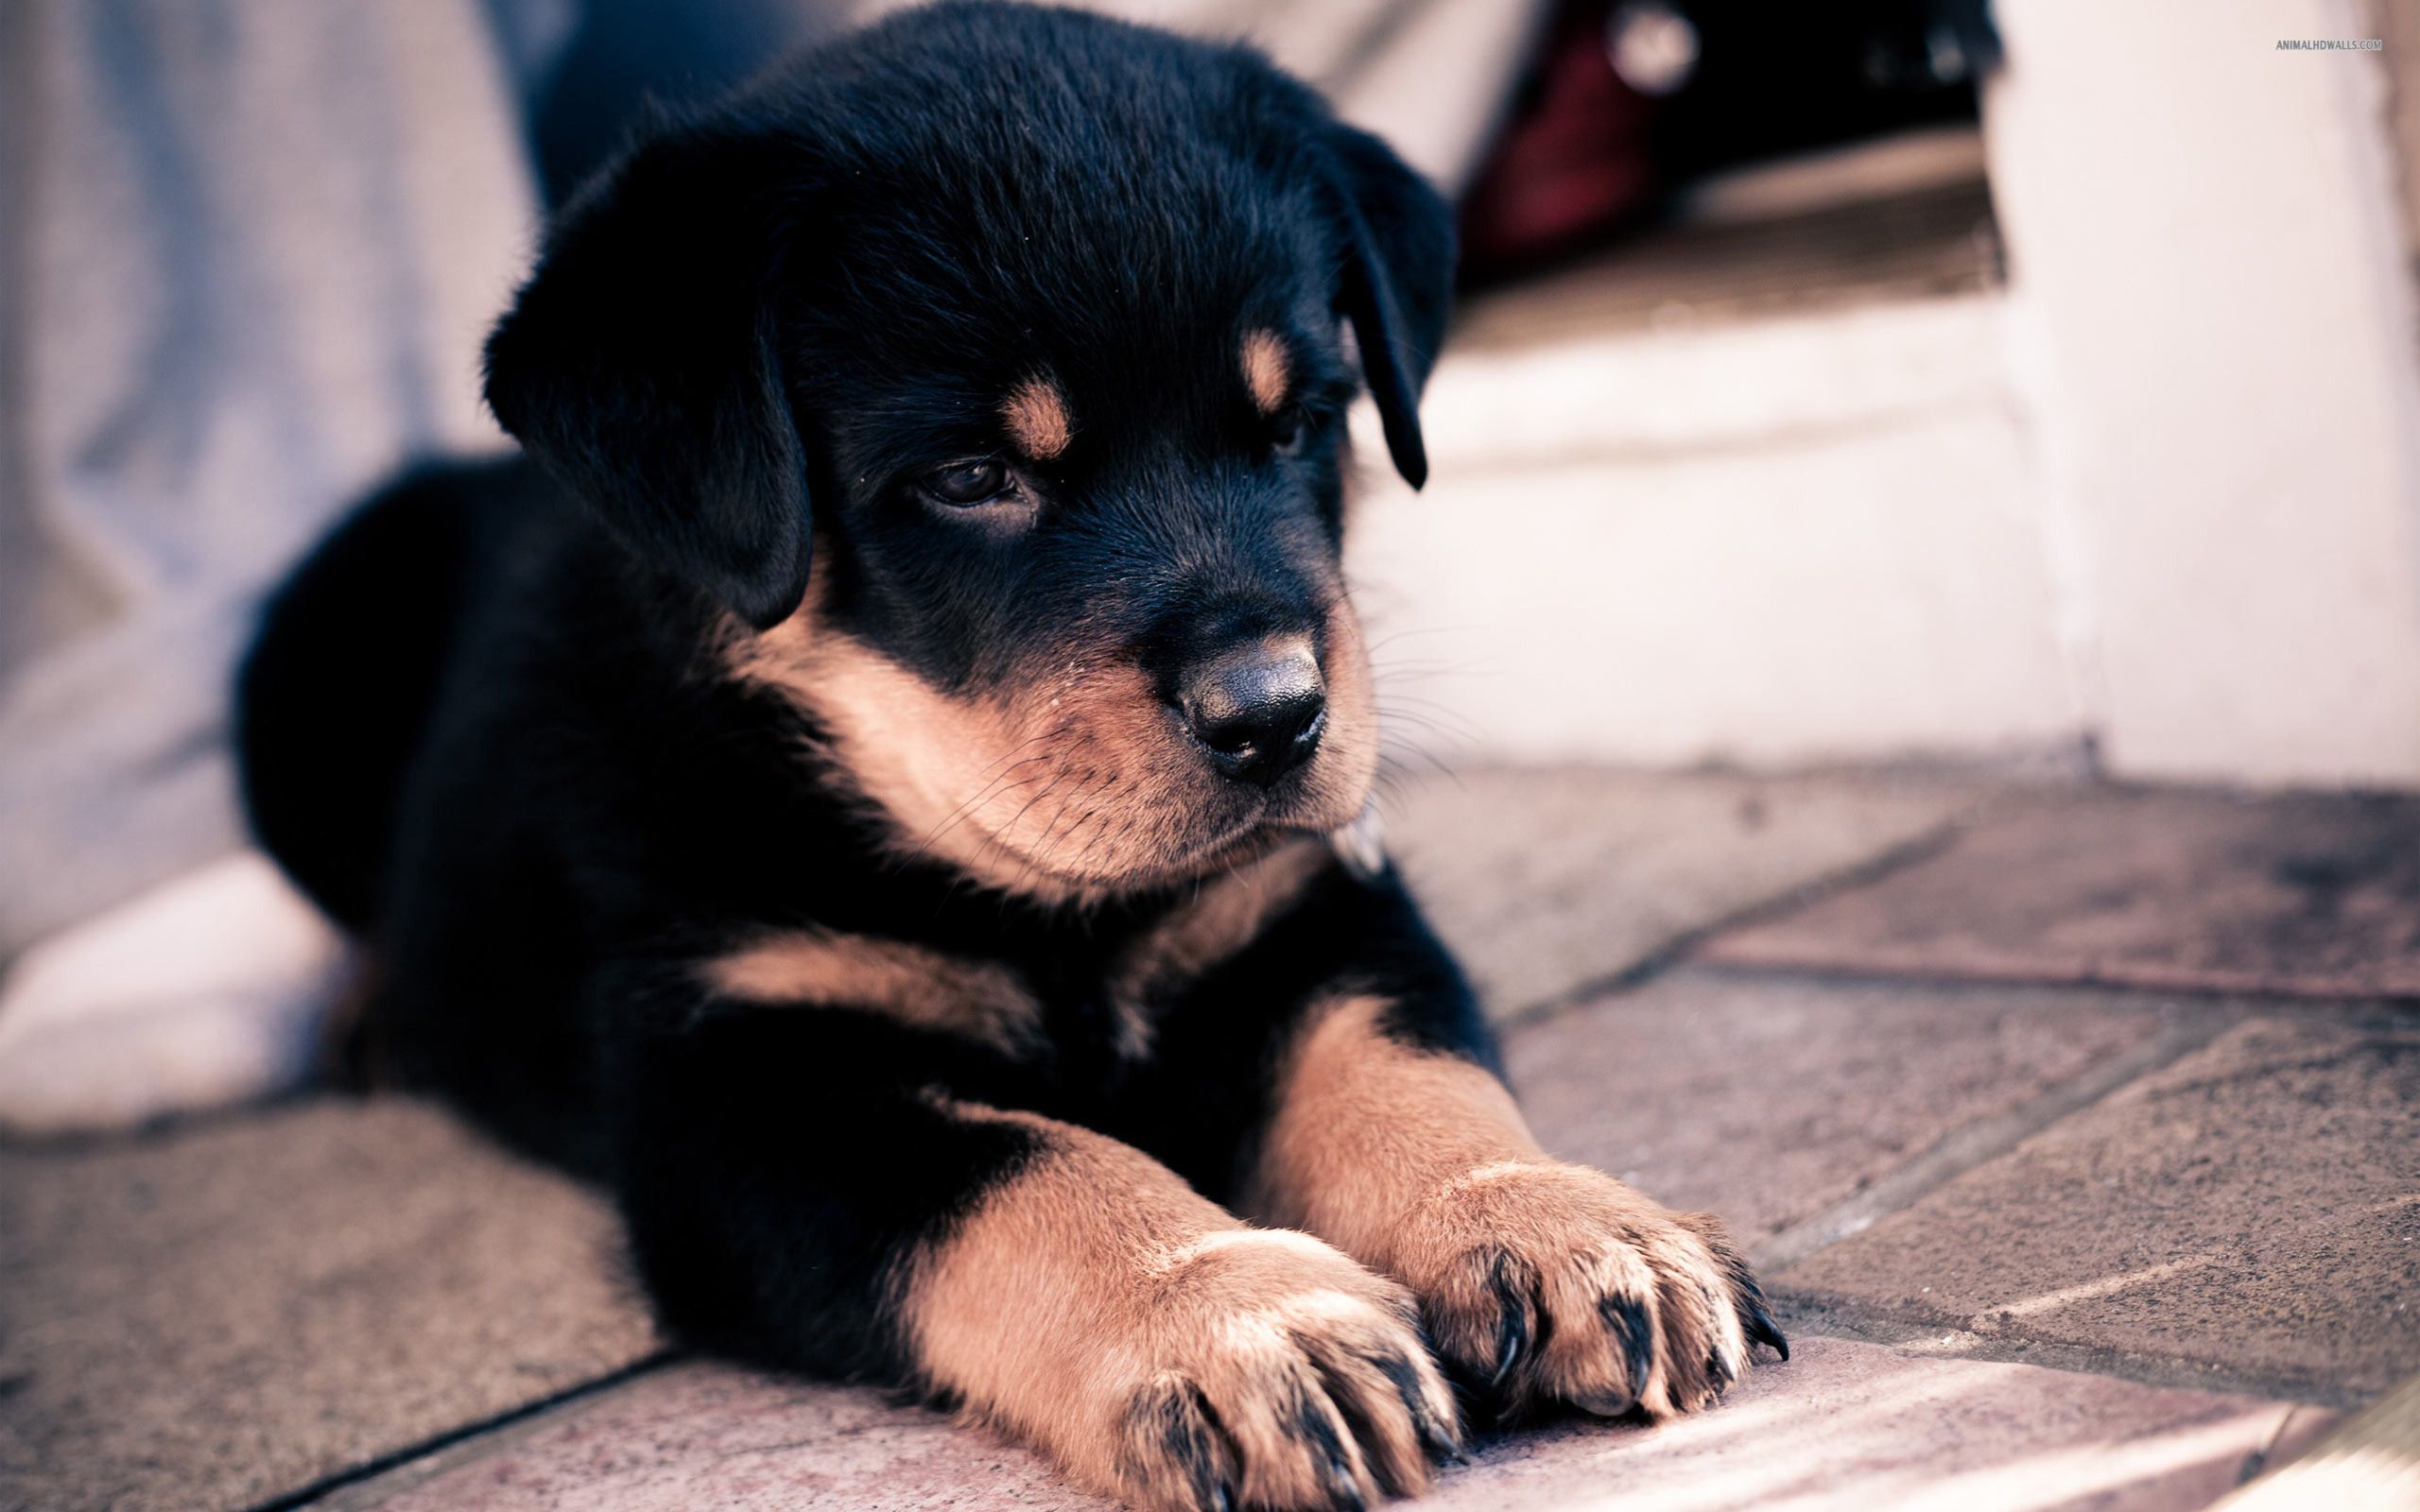 HD wallpaper, Pictures, Puppy, Rottweiler